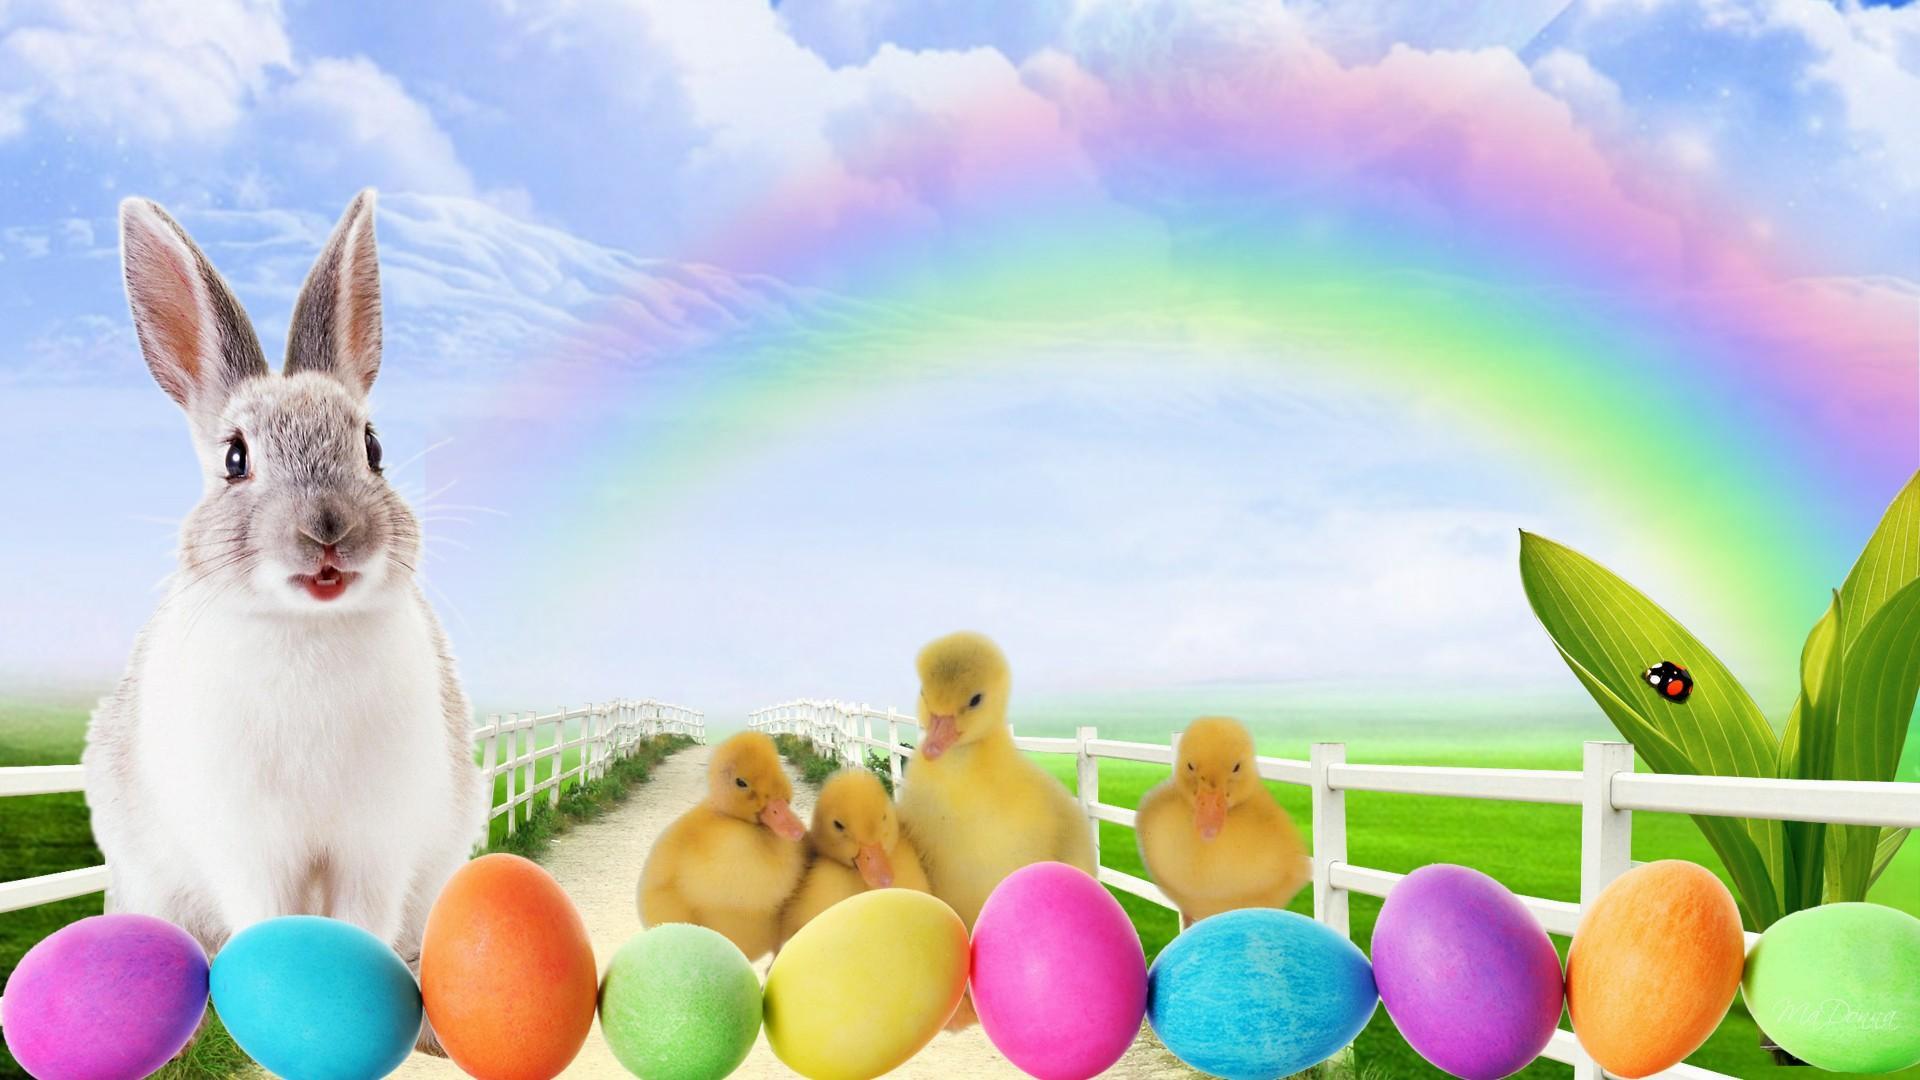 Happy Easter wallpapers for desktop download free Happy Easter pictures  and backgrounds for PC  moborg